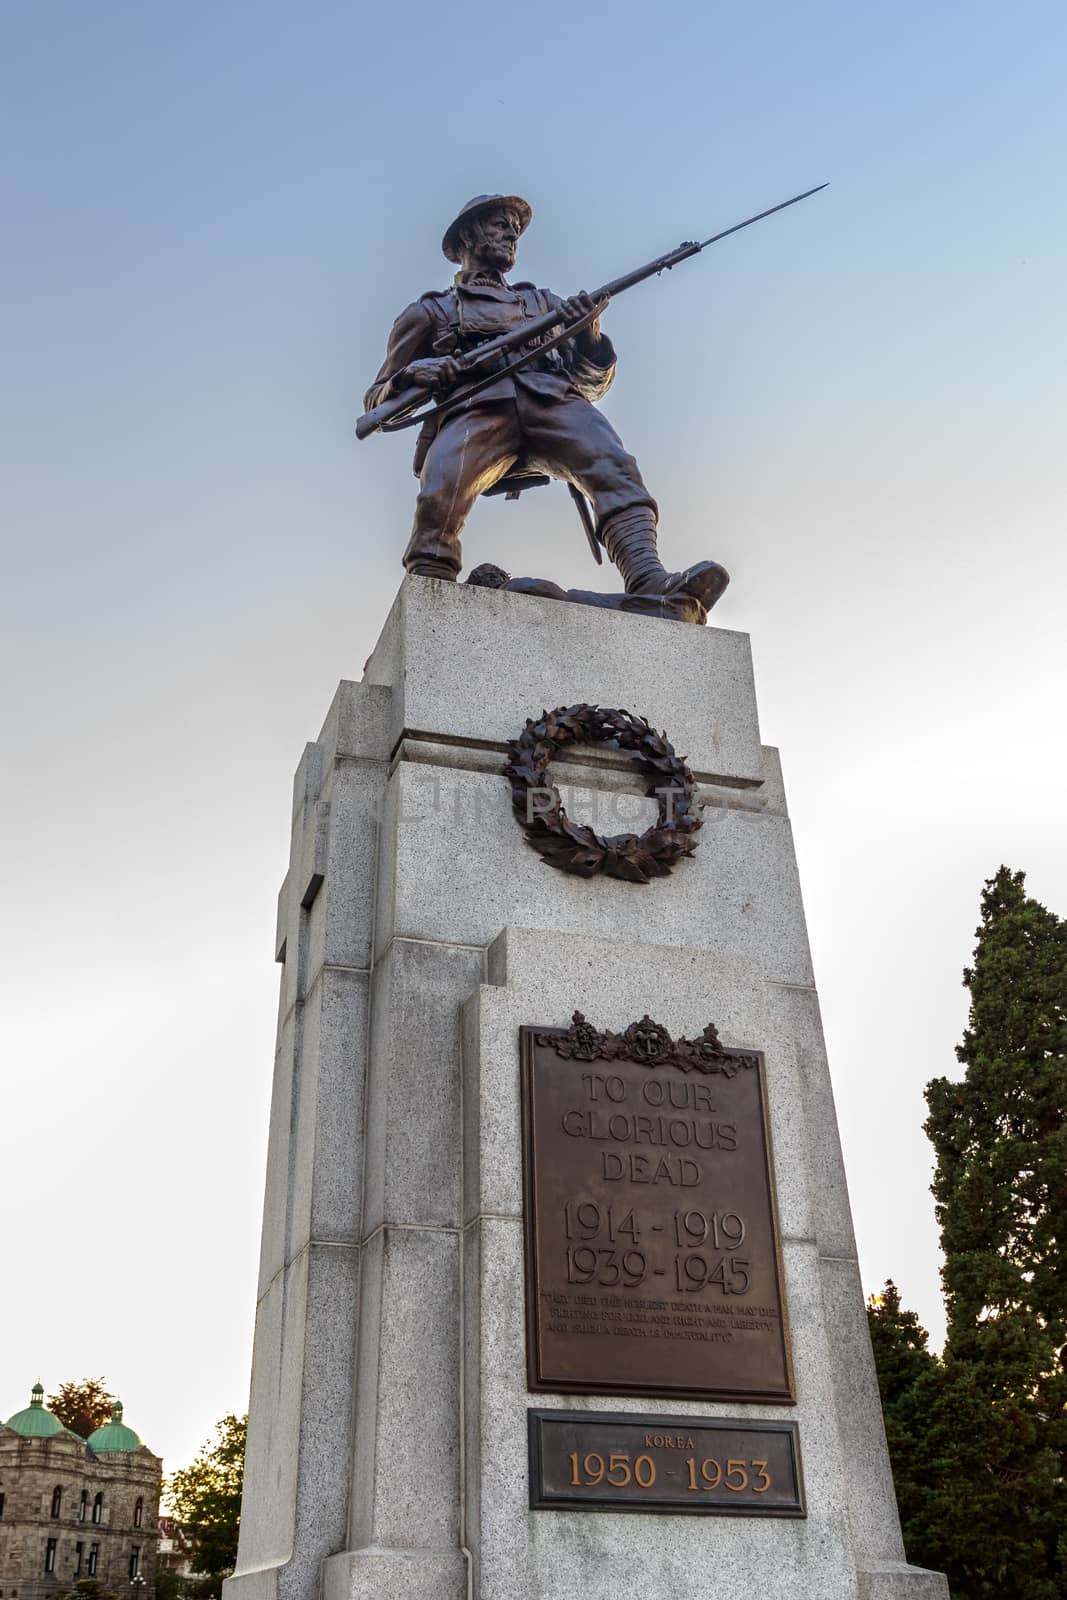 Canadian Soldier Statue for Fallen Canadian Soldiers in World War 1, World War 2 and Korea in Front of Provincial Capital Legislative Parliament Buildiing Victoria British Columbia Canada.